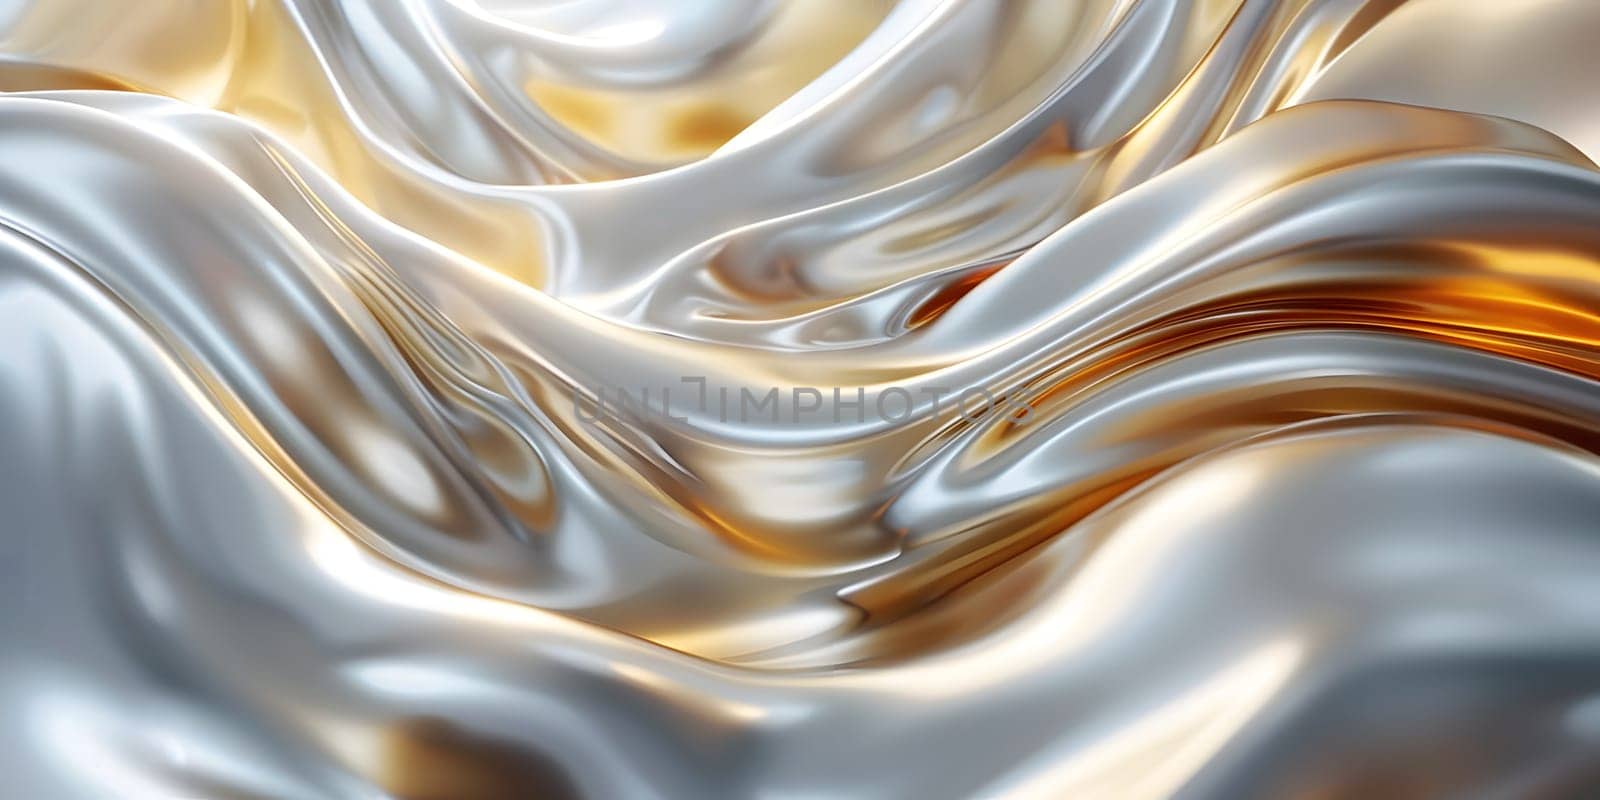 Macro photography of liquid gold satin fabric with intricate white pattern by Nadtochiy